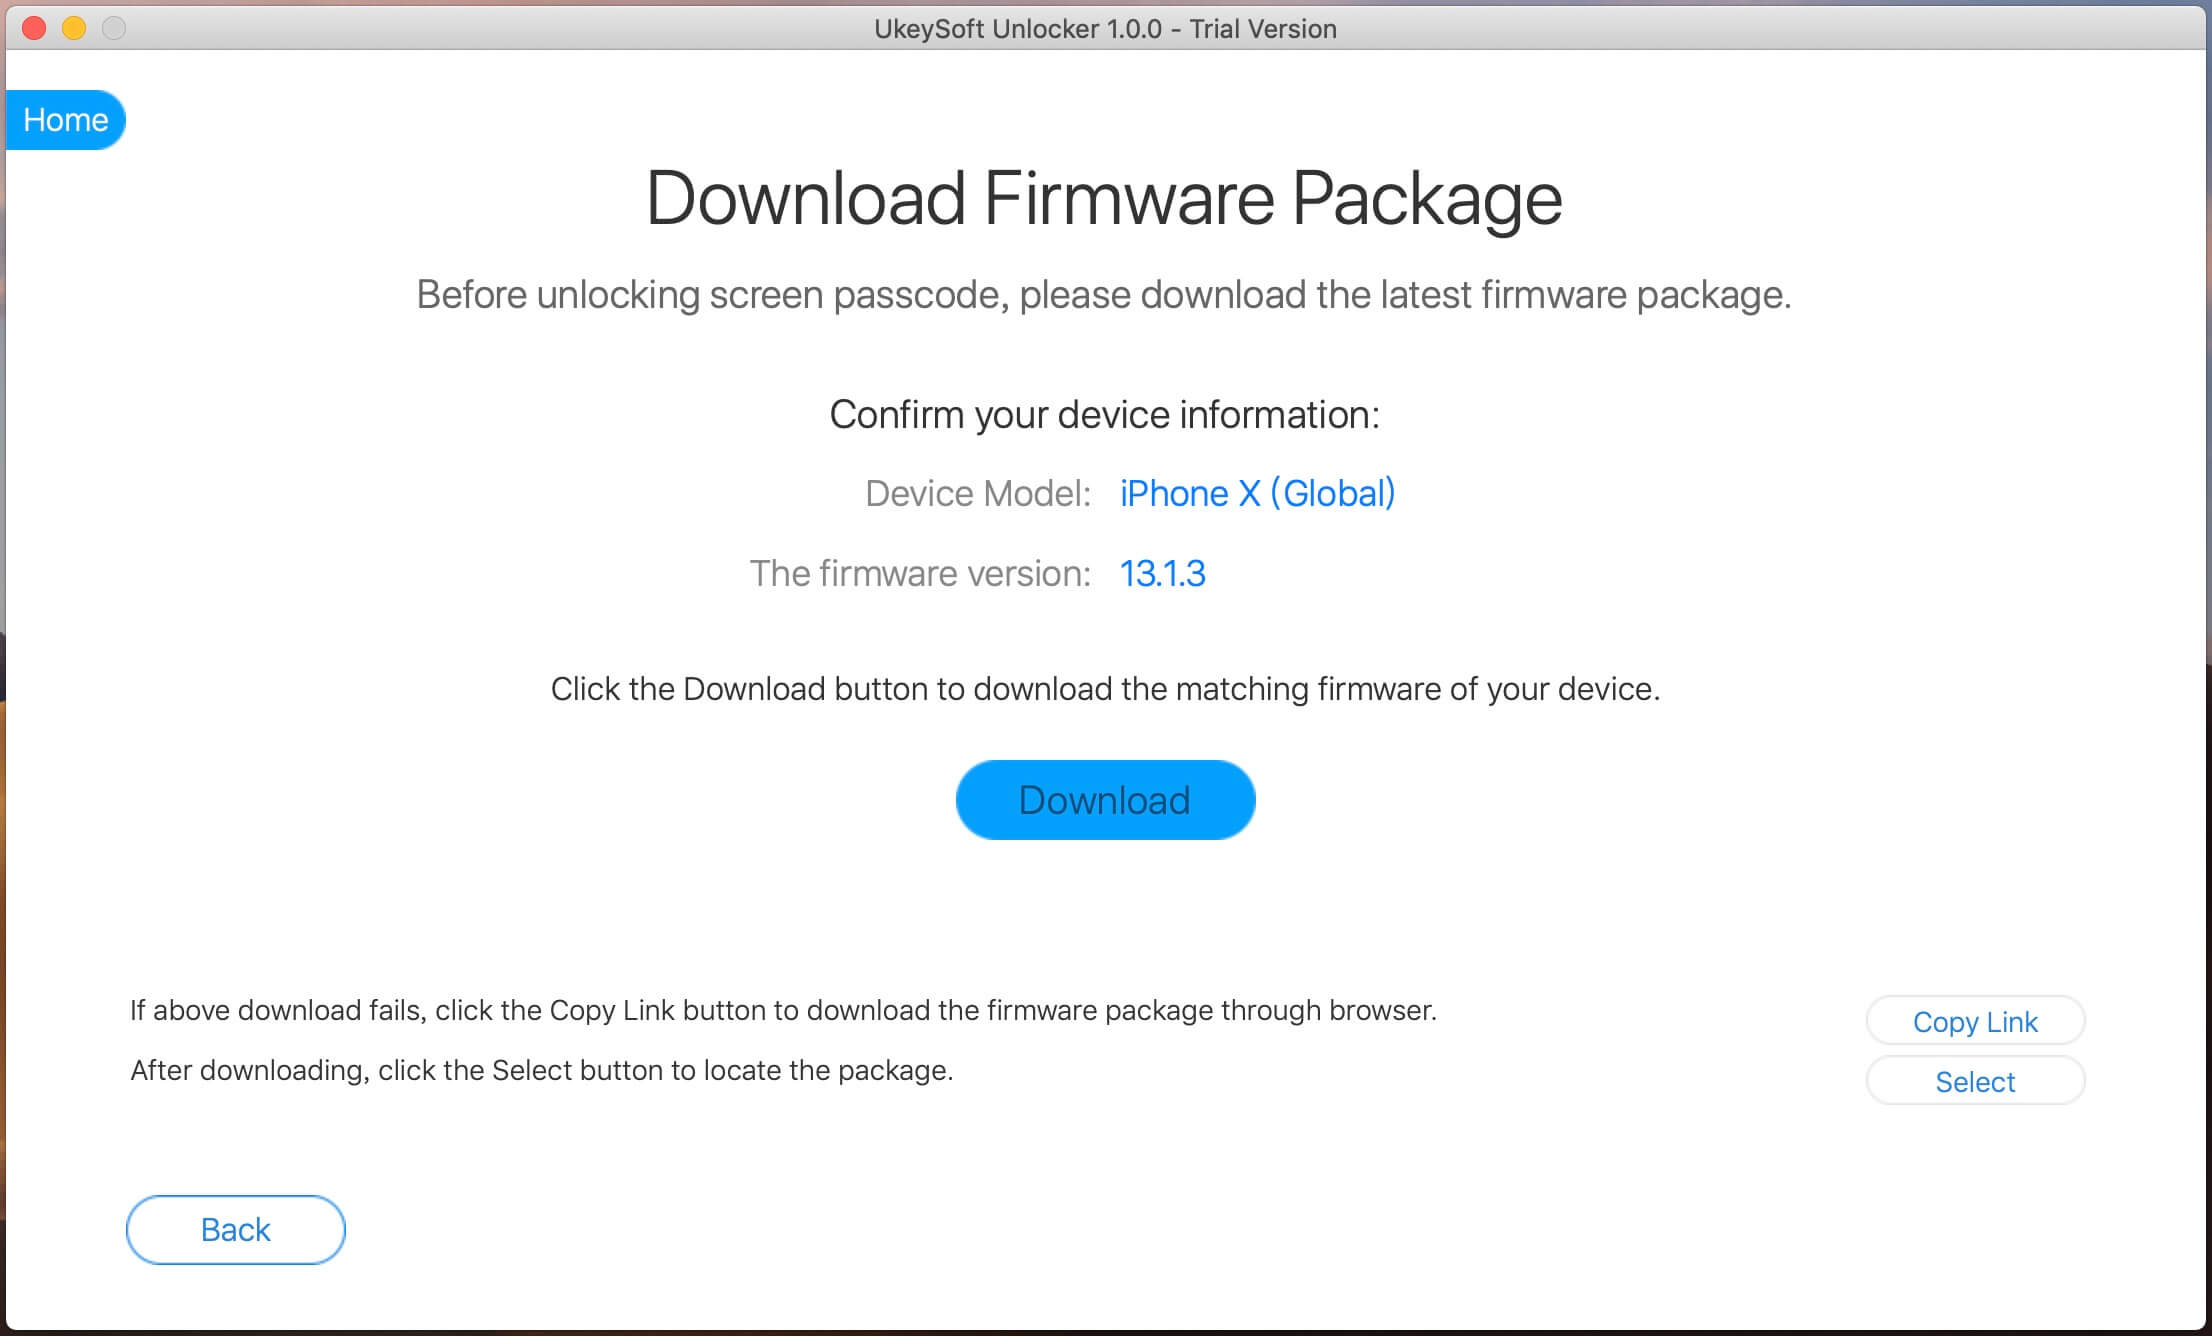 Download Firmware package